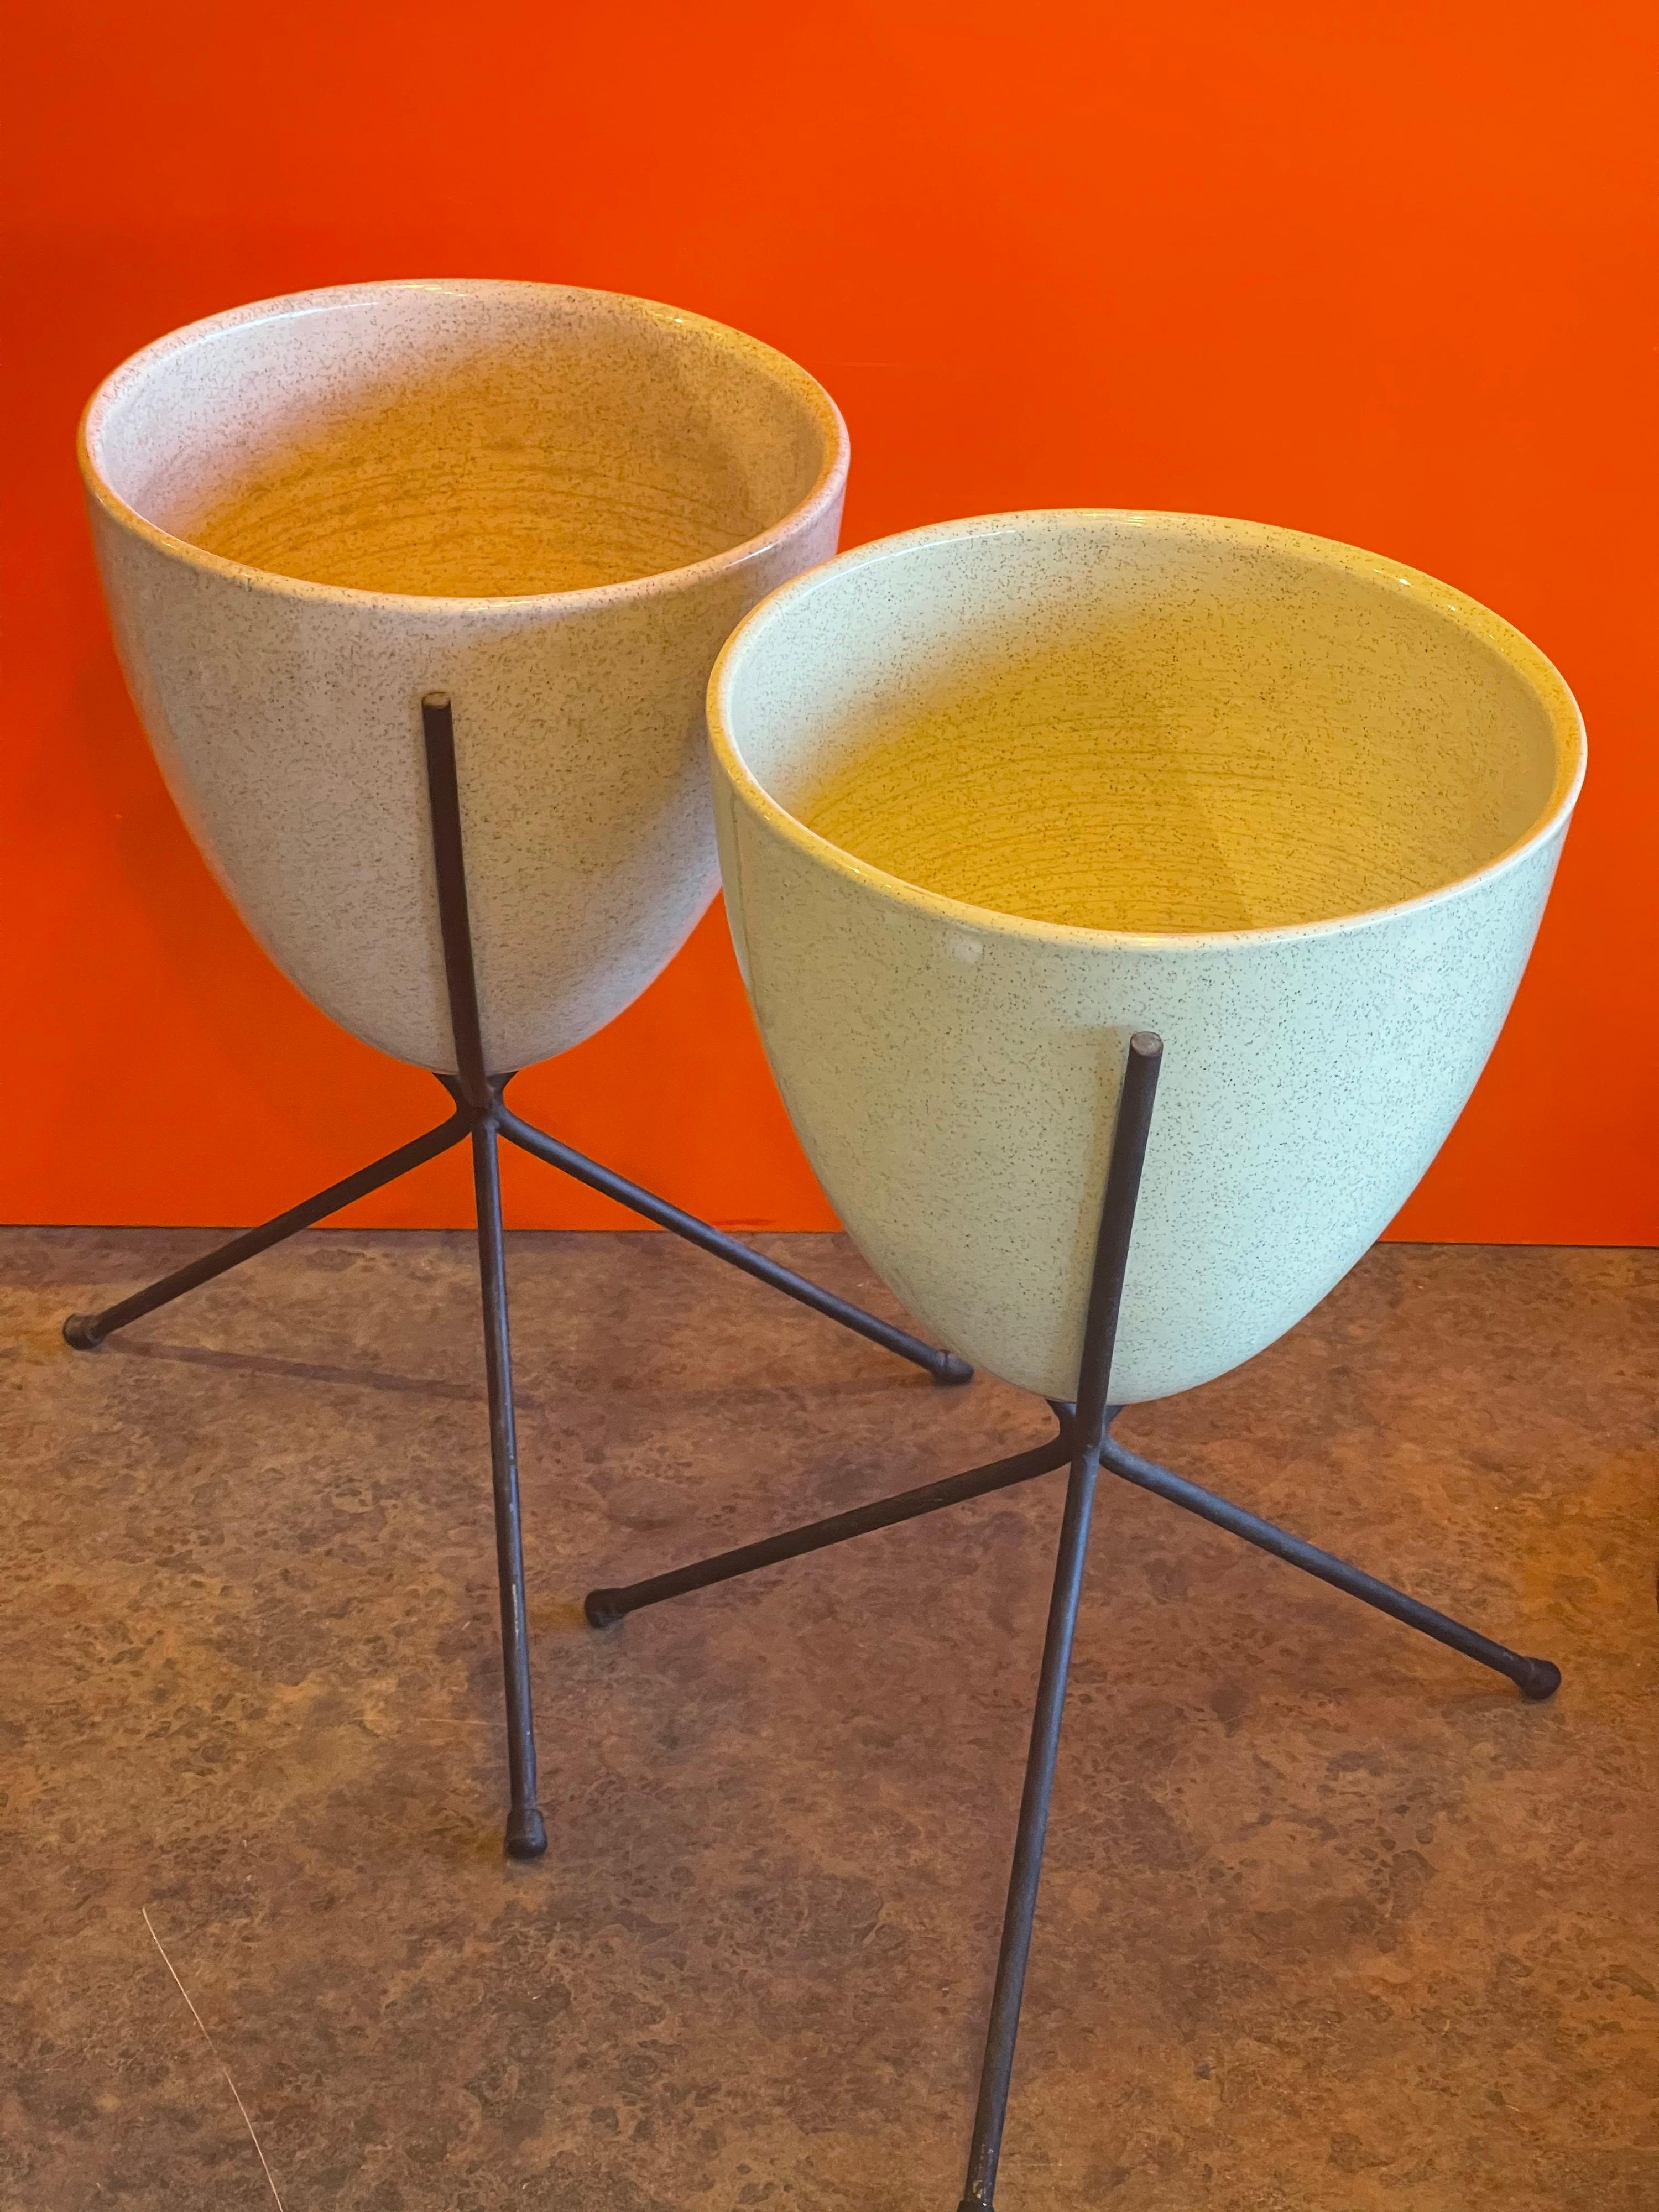 20th Century Rare Pair of Atomic Age Ceramic Bullet Planters on the Metal Stands by Bauer For Sale